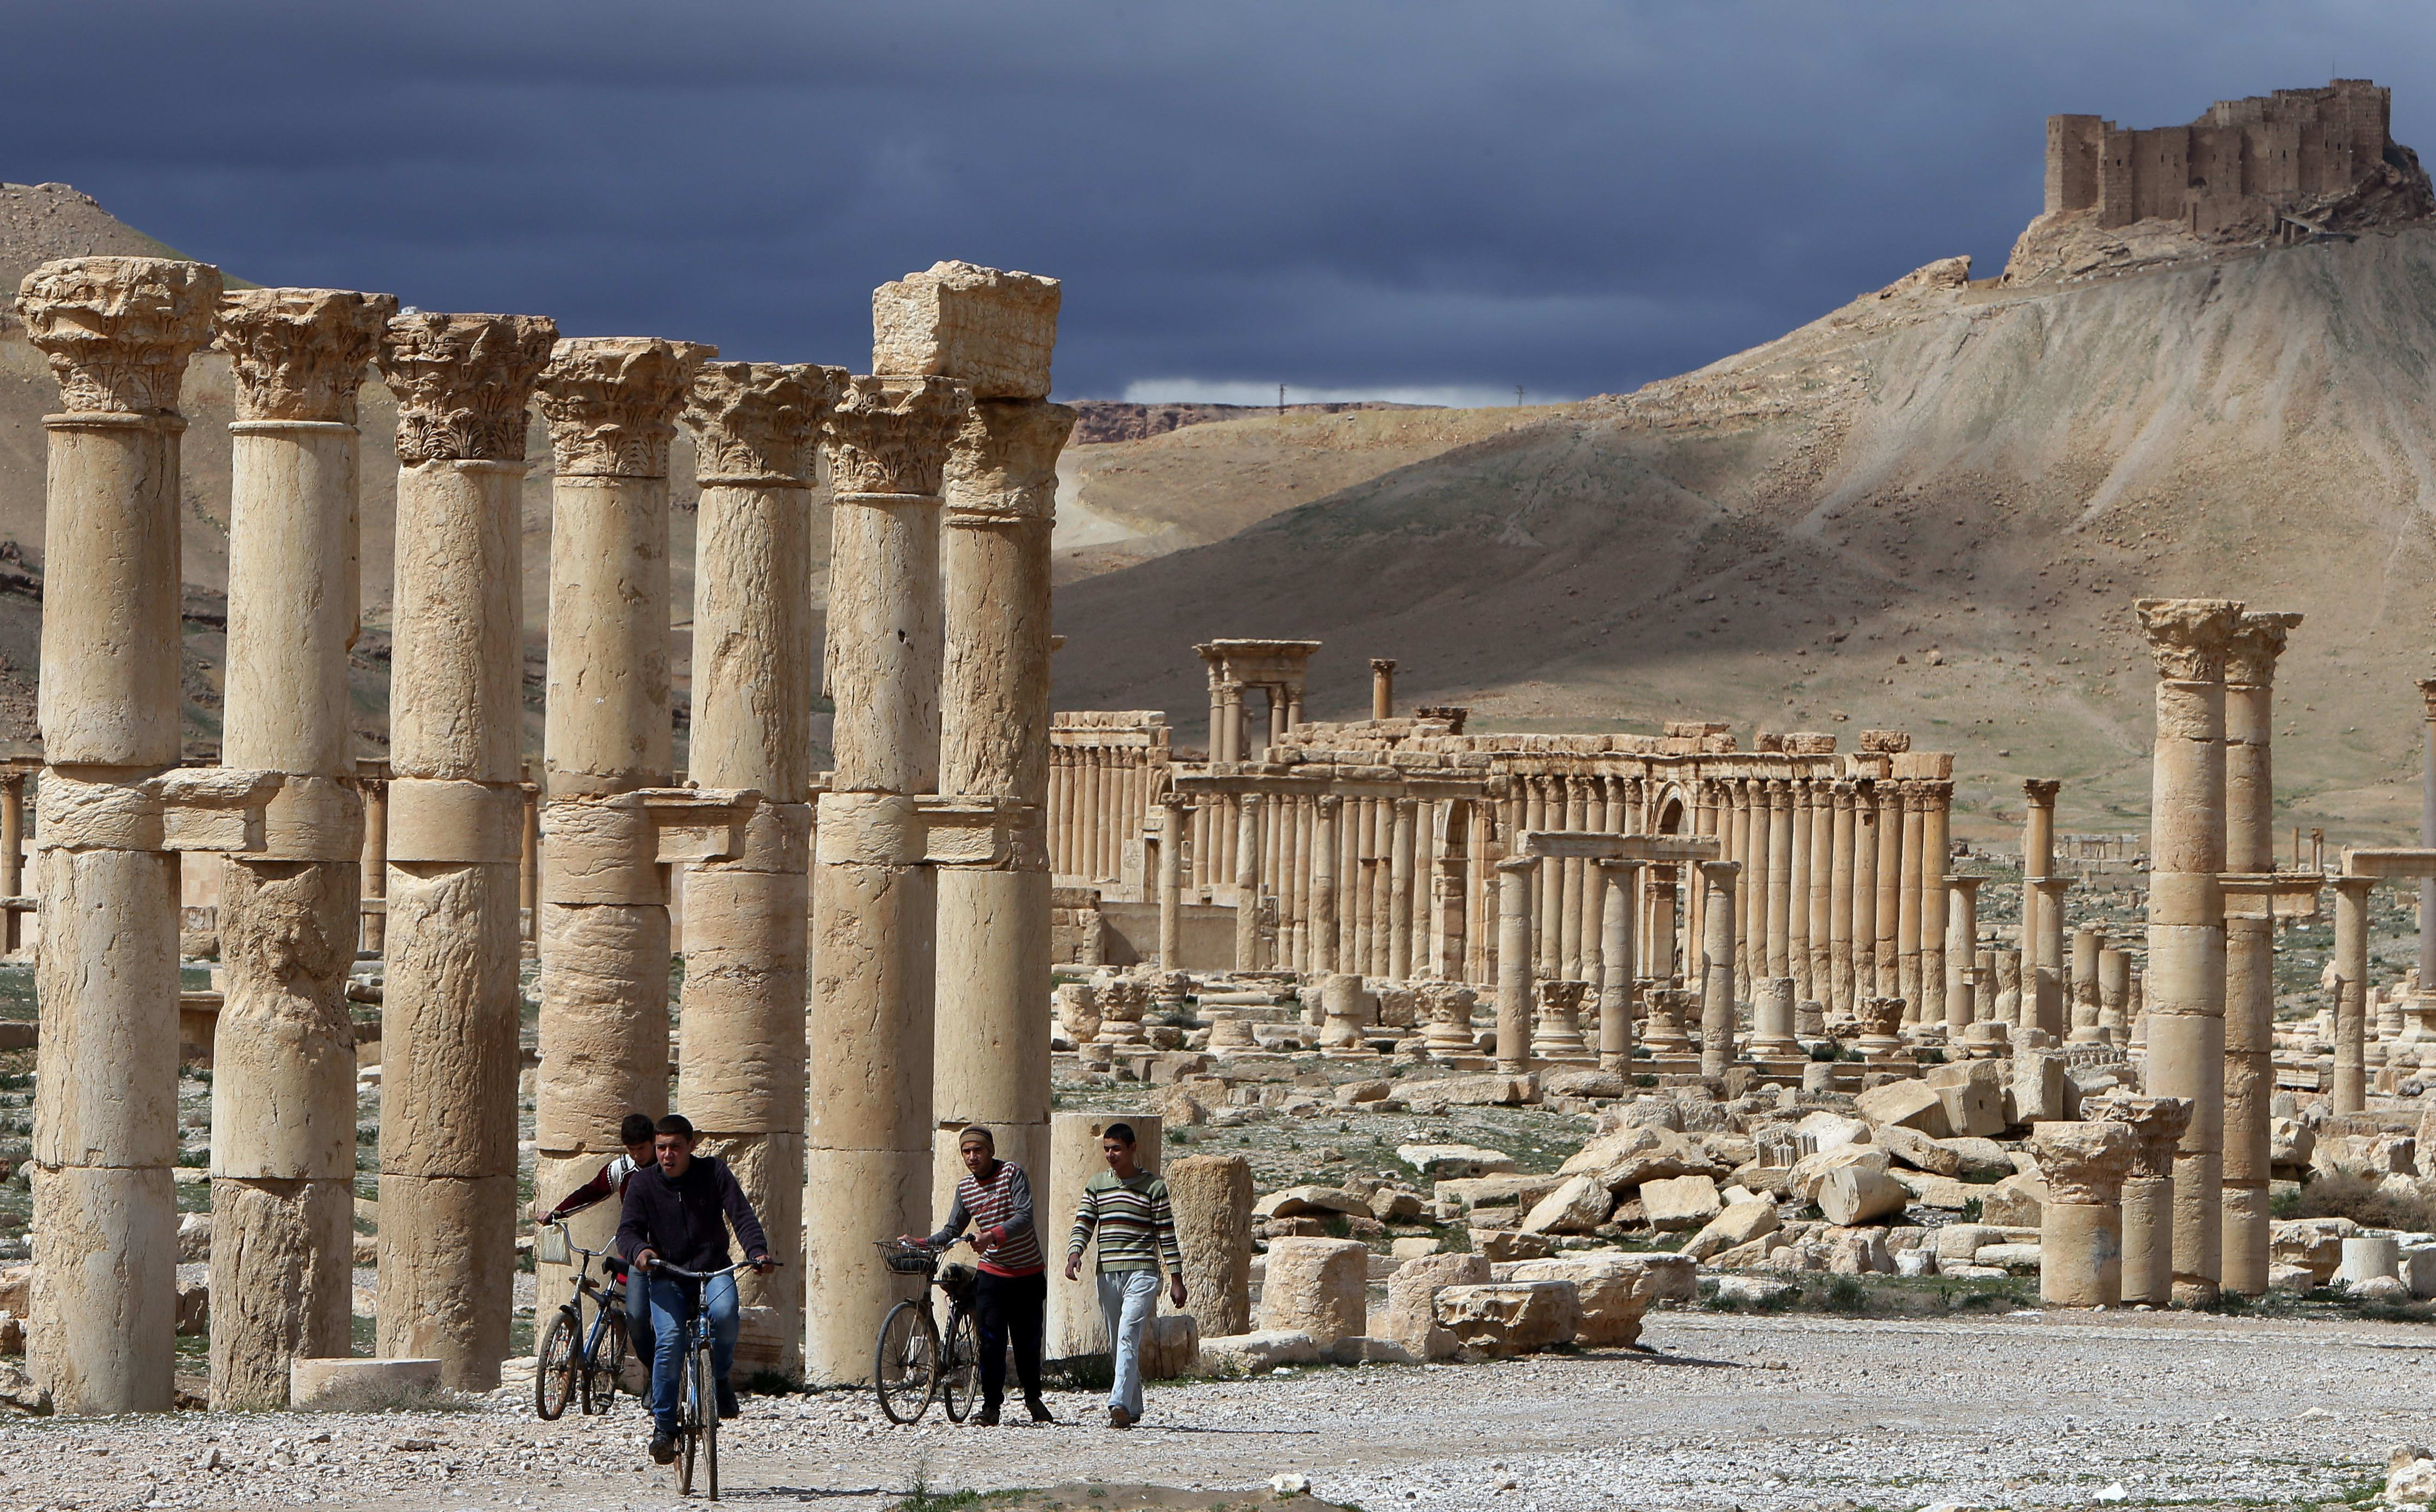 Cultural officials fear for the safety of the ancient oasis city of Palmyra, 215 kilometres northeast of Damascus.